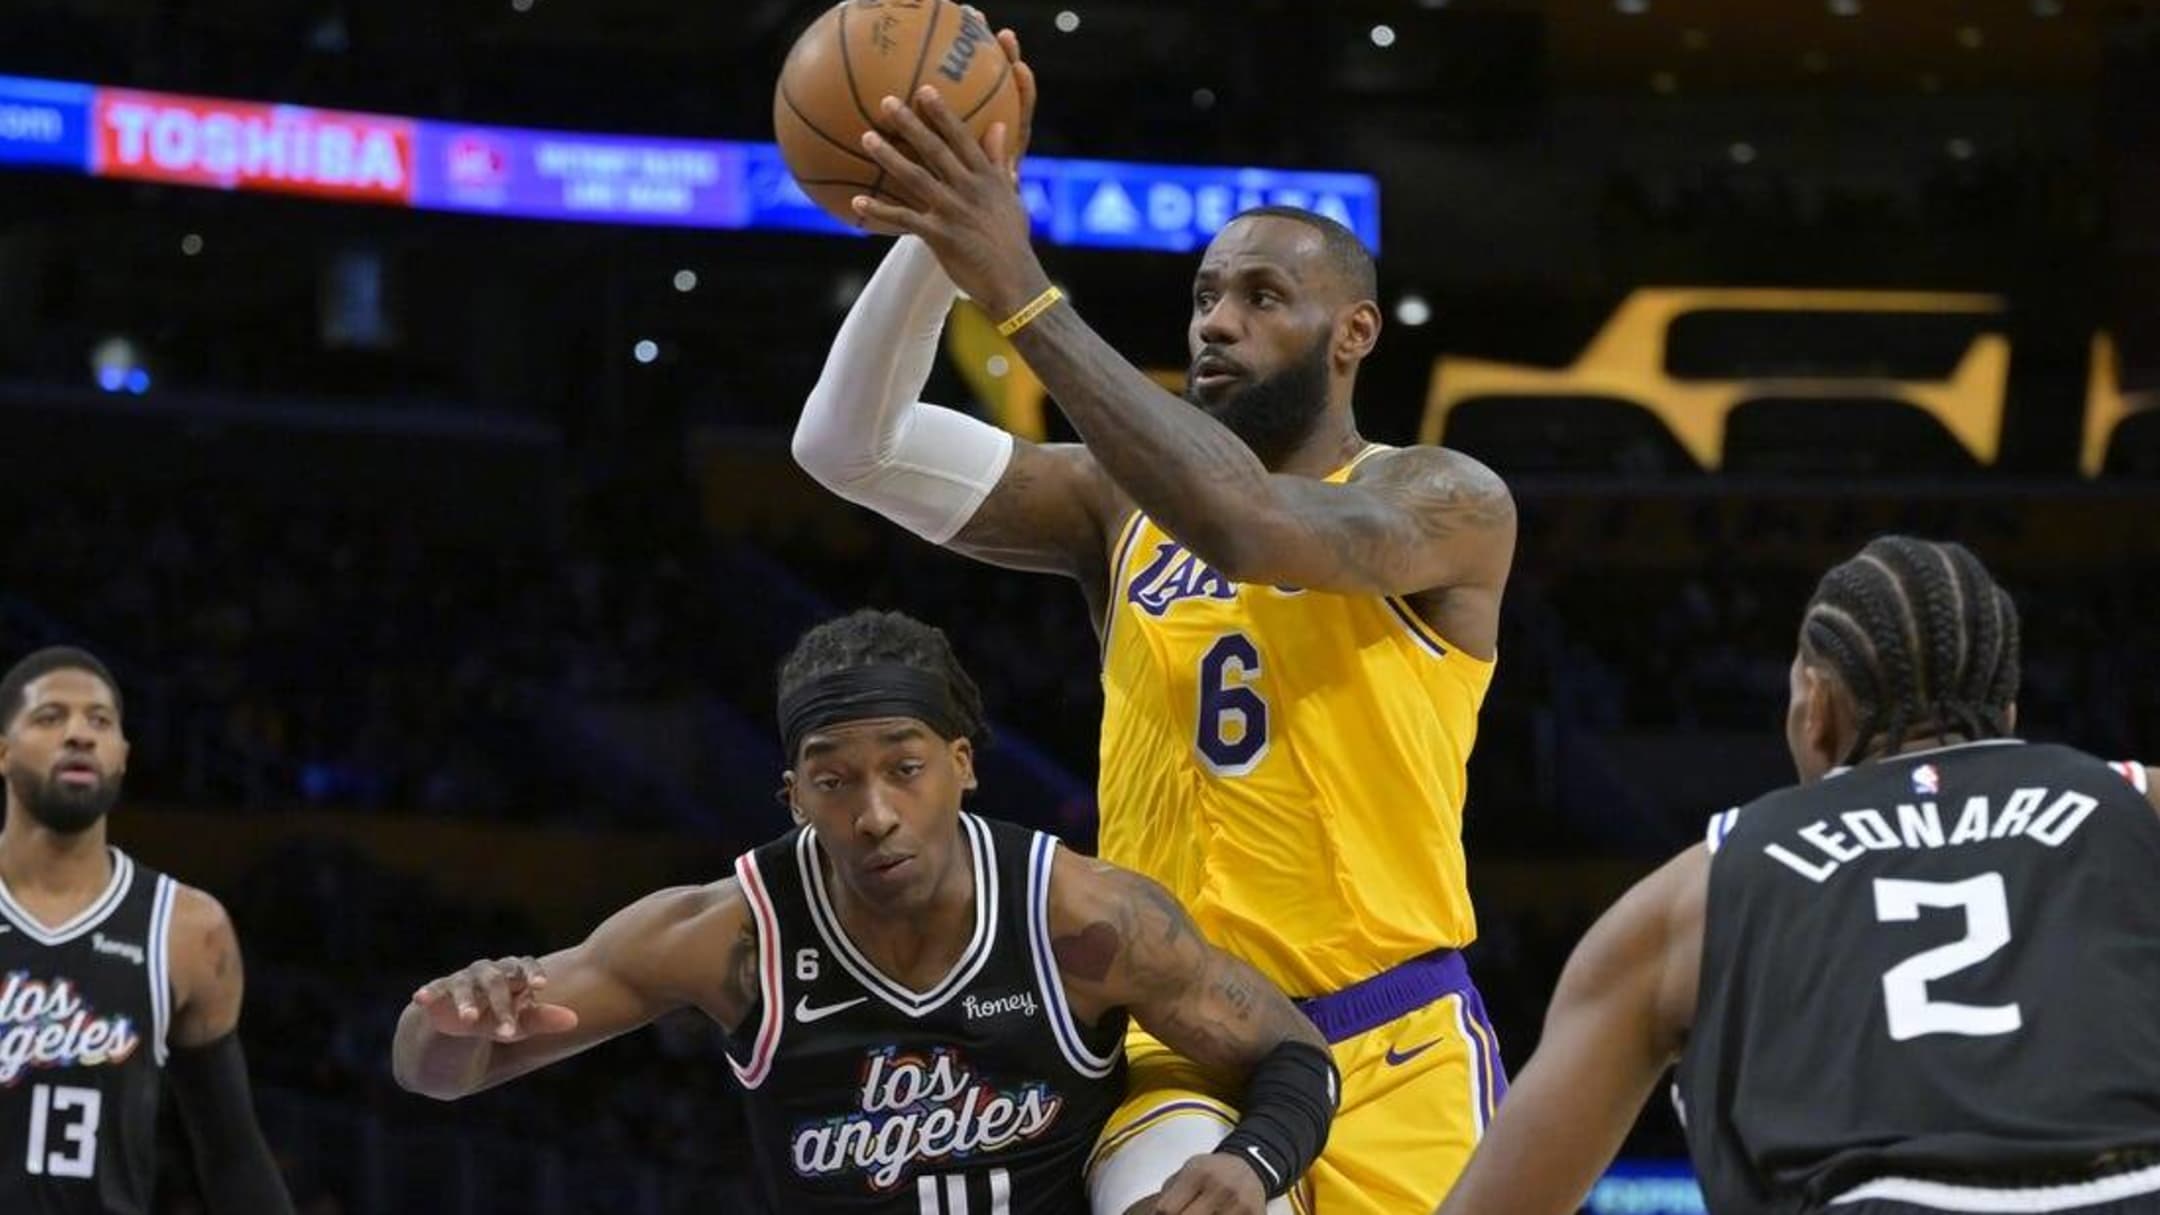 LeBron scores 46 points with 9 3s, but Clippers rout Lakers